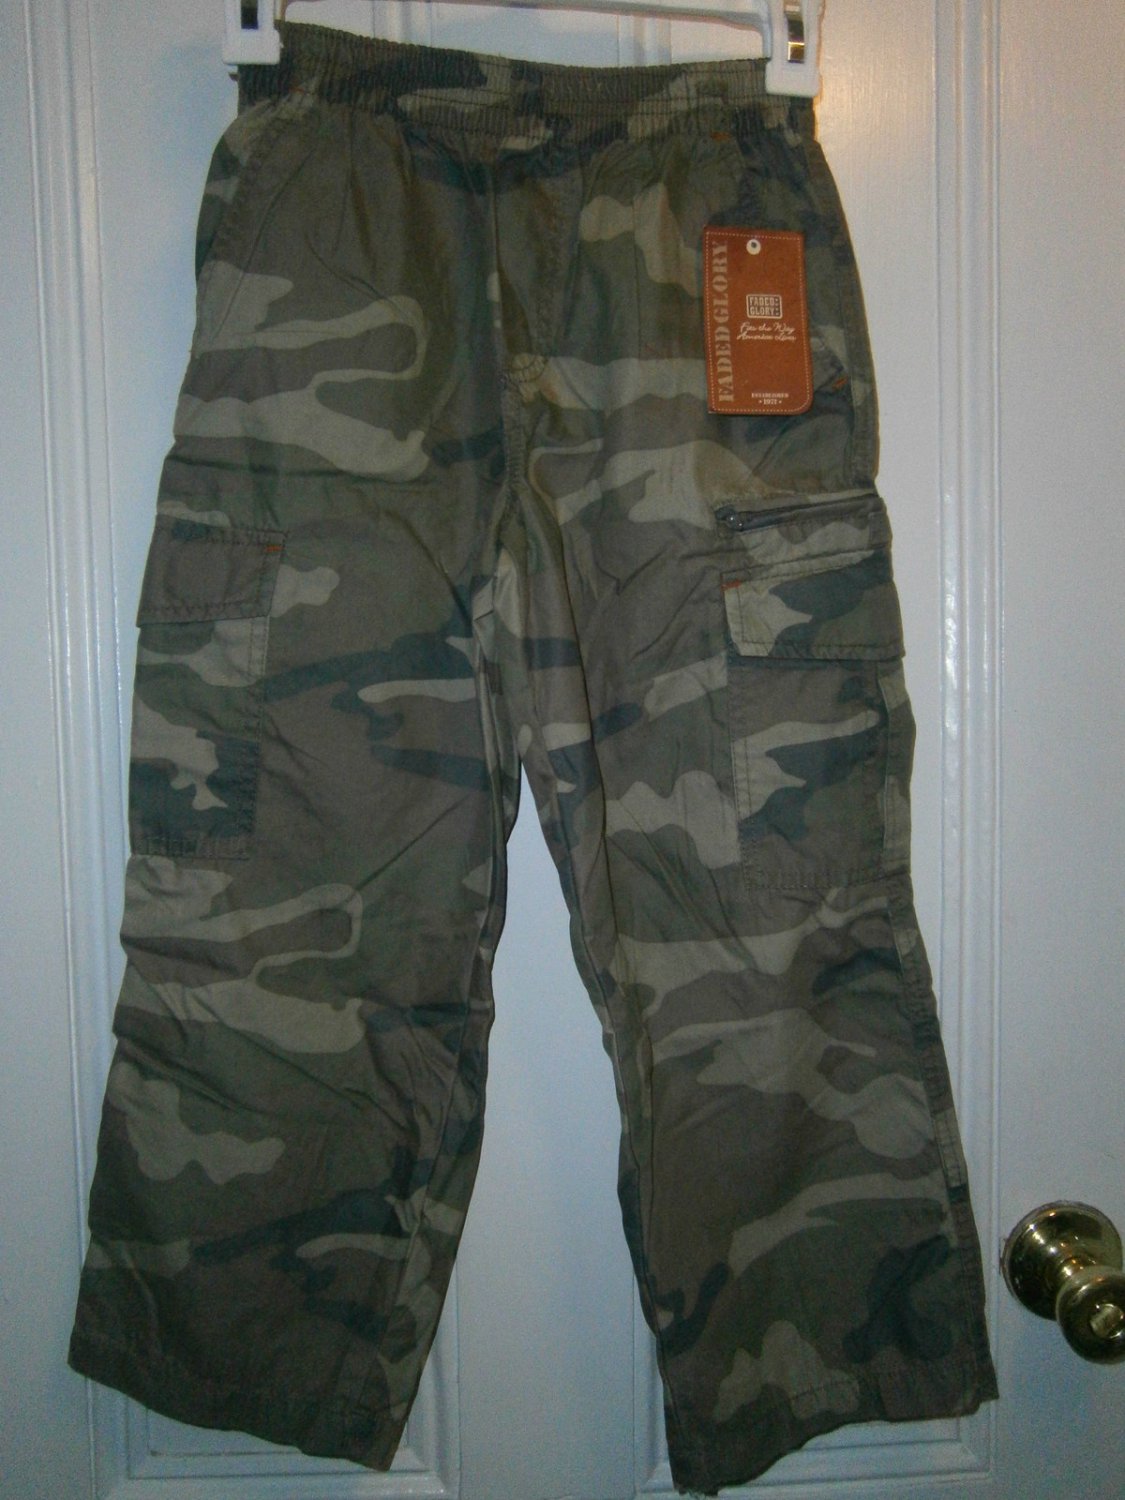 New FADED GLORY Originals PANTS CAMO Camouflage Cargo Boys Size 6